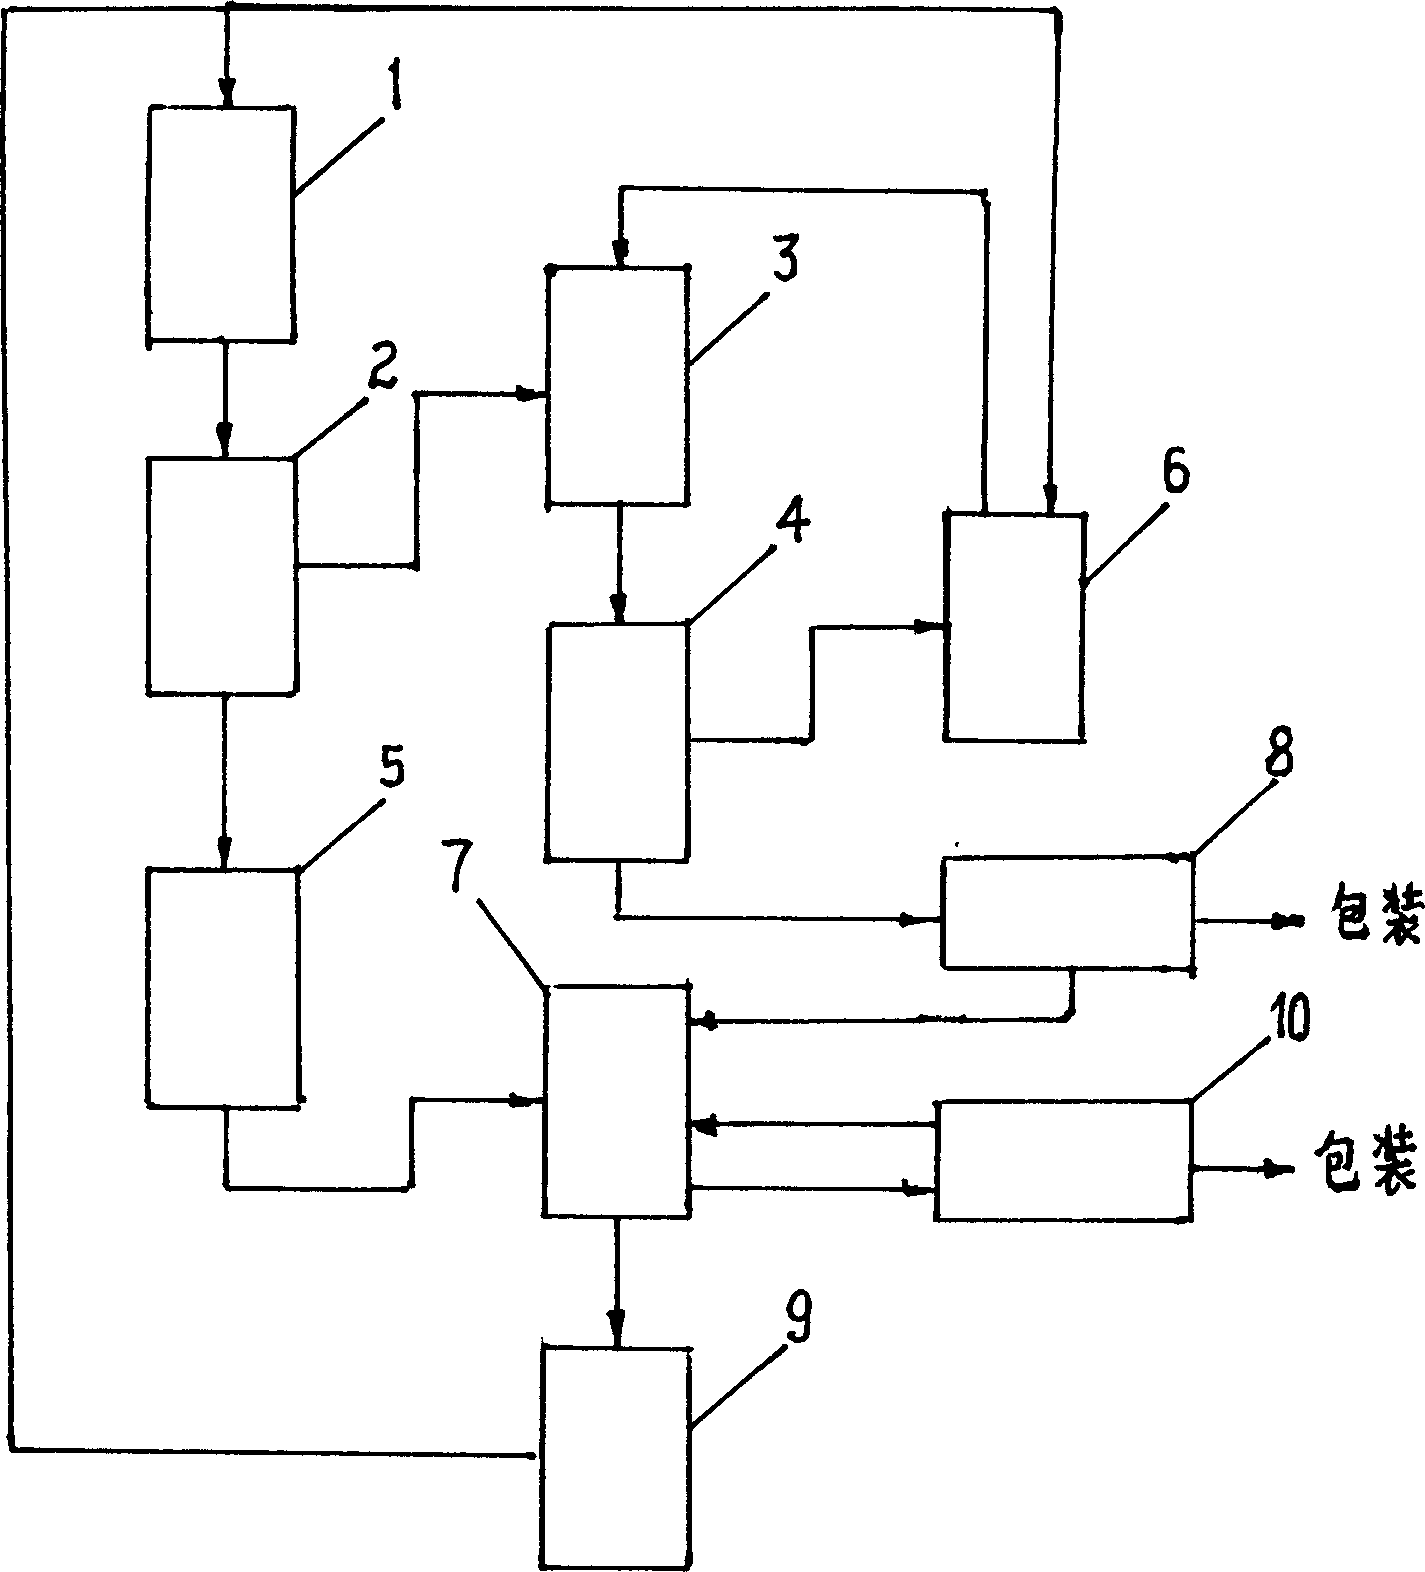 Method for recycling paper and plastic from waste product of one-off paper and plastic health aids